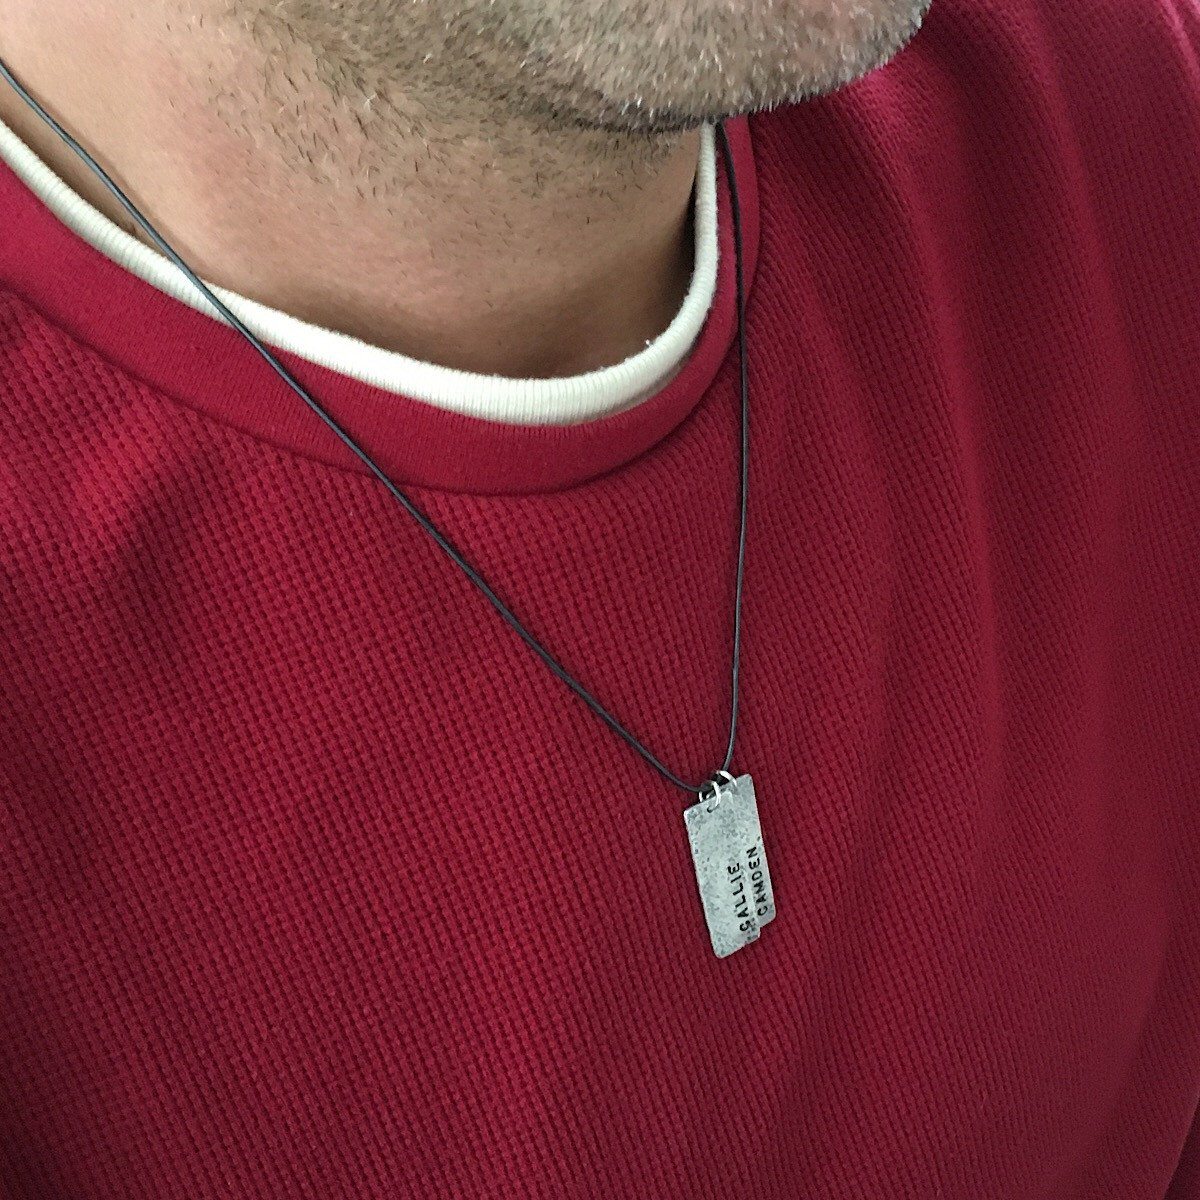 Men's Tall Tags  - IsabelleGraceJewelry